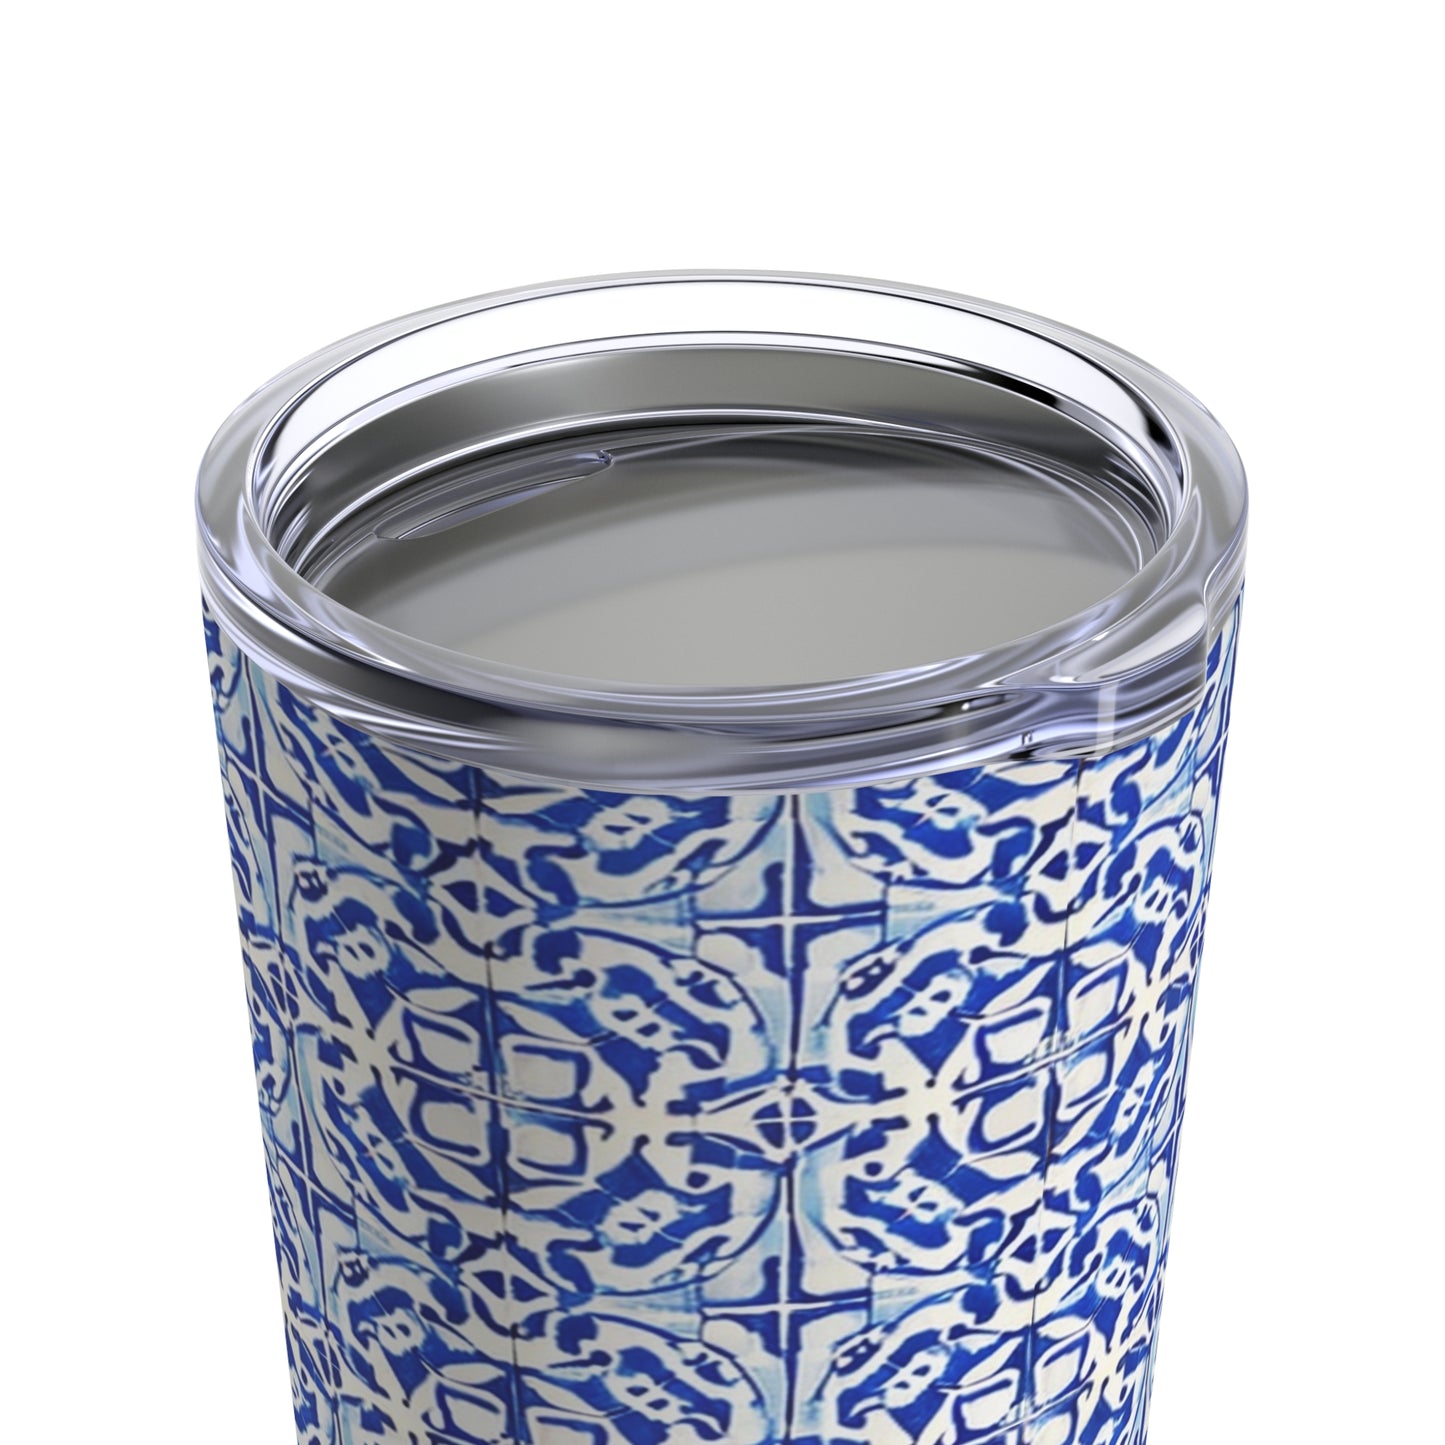 Delft Antique Blue and White Geometric Pattern Tile Hot and Cold Beverage Travel Tumbler 20oz